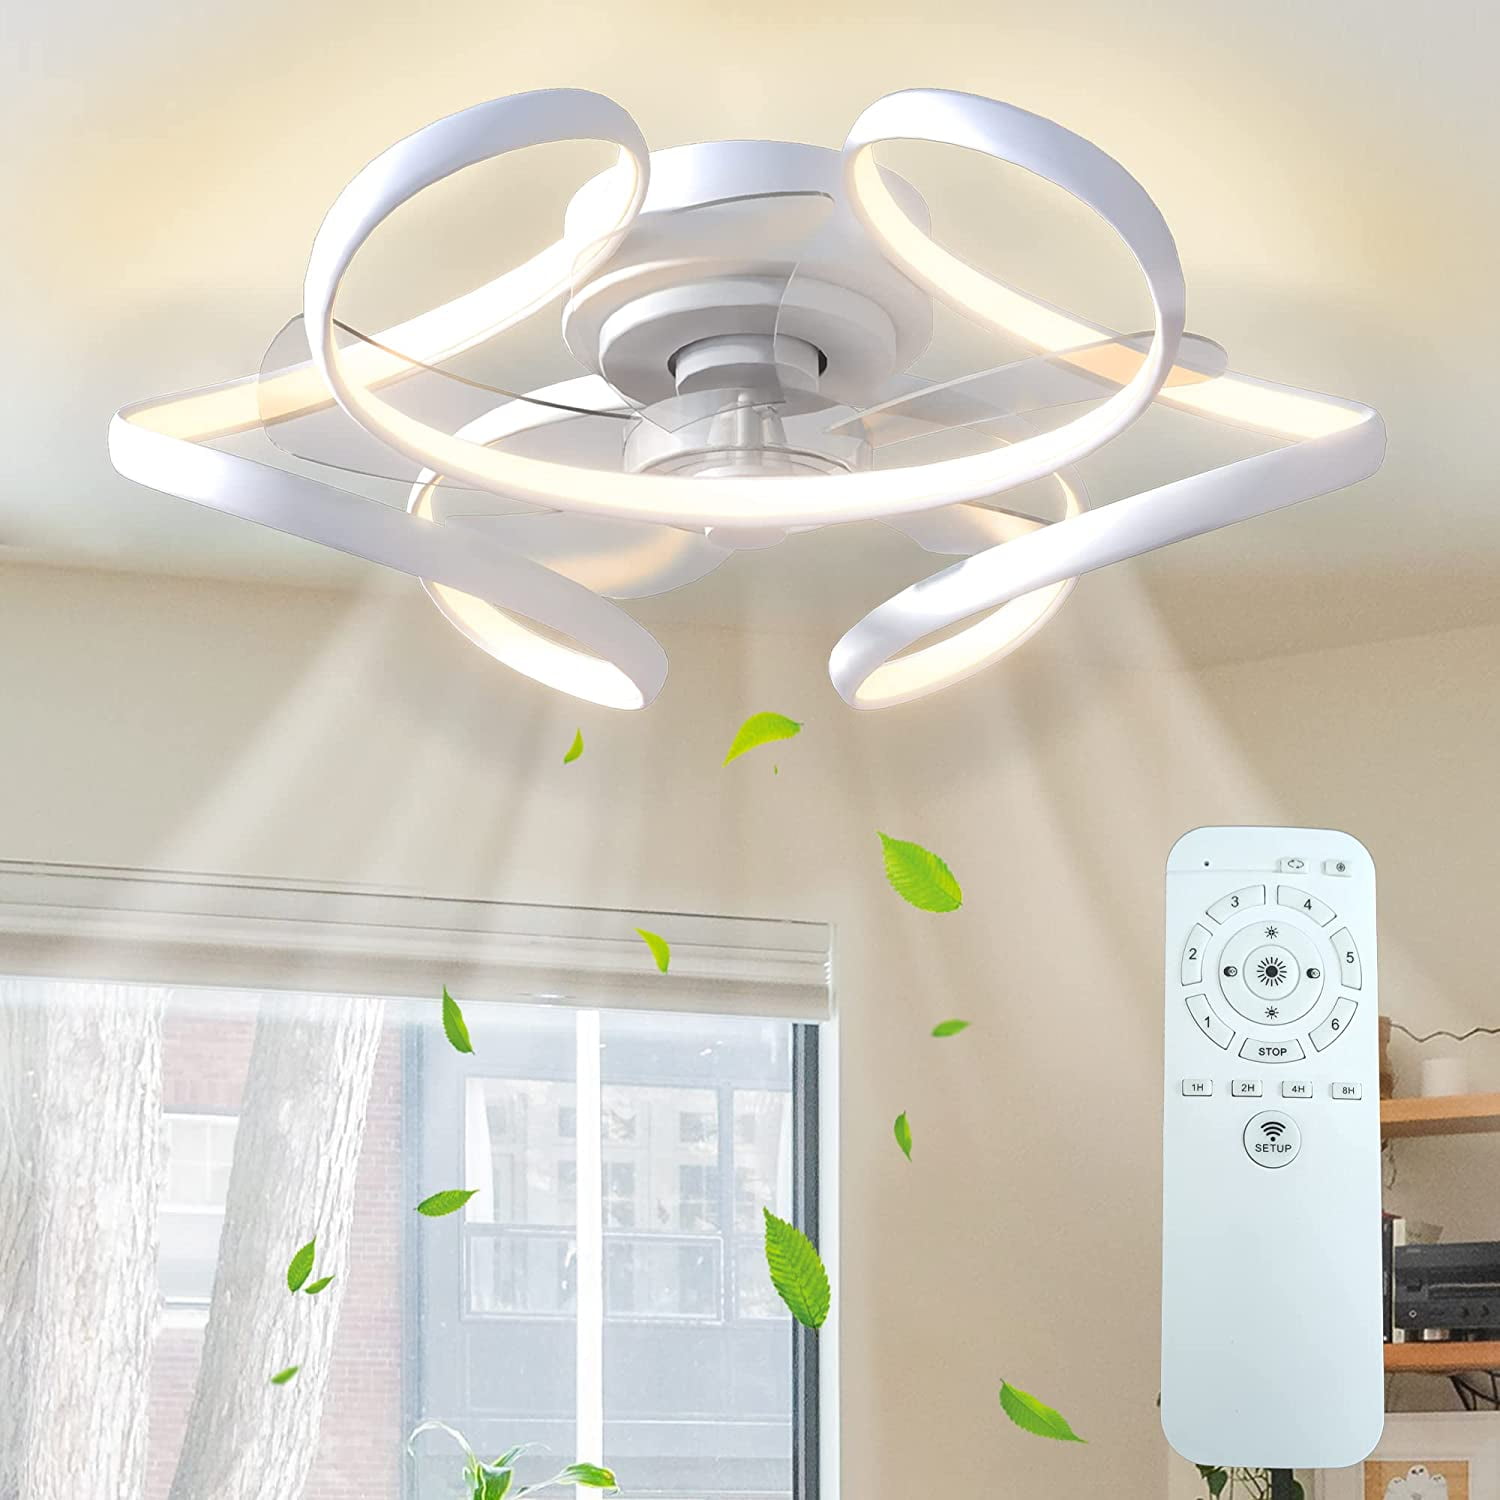 Surnie Ceiling Fan With Light Remote